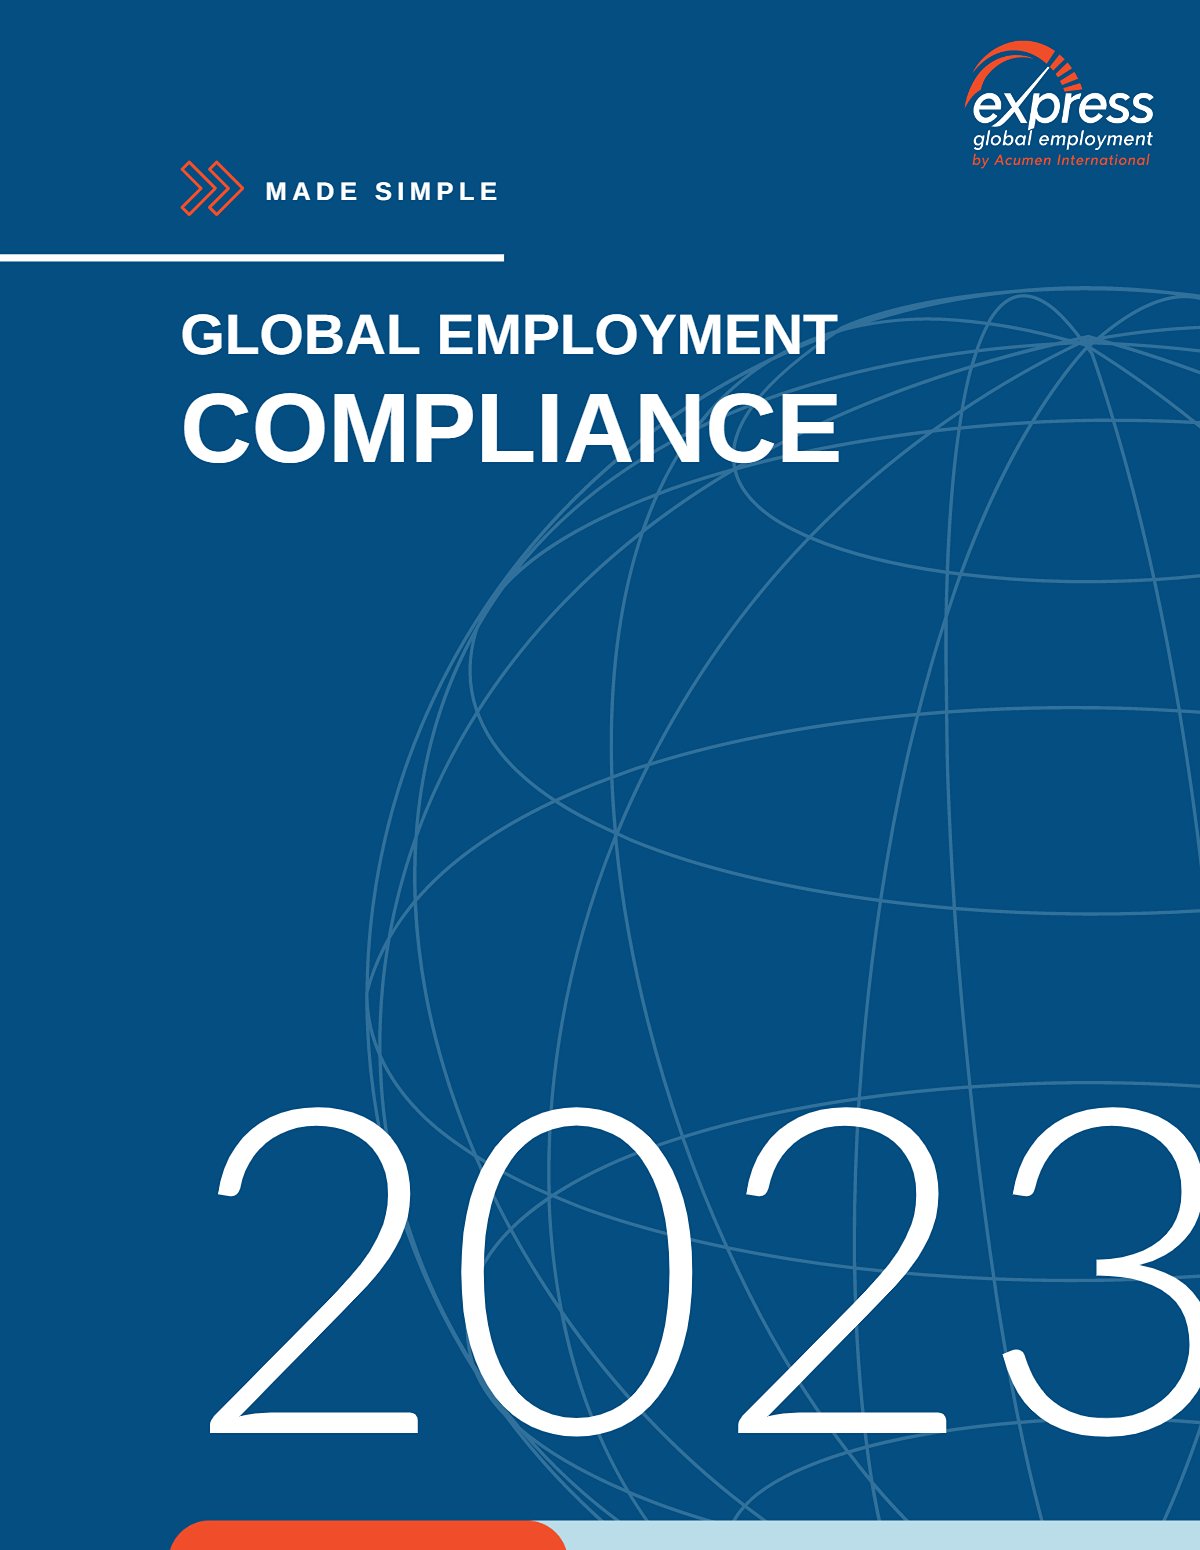 Top 3 Pillars of Global Employment Compliance 2023. 190 Countries - Ultimate Guide